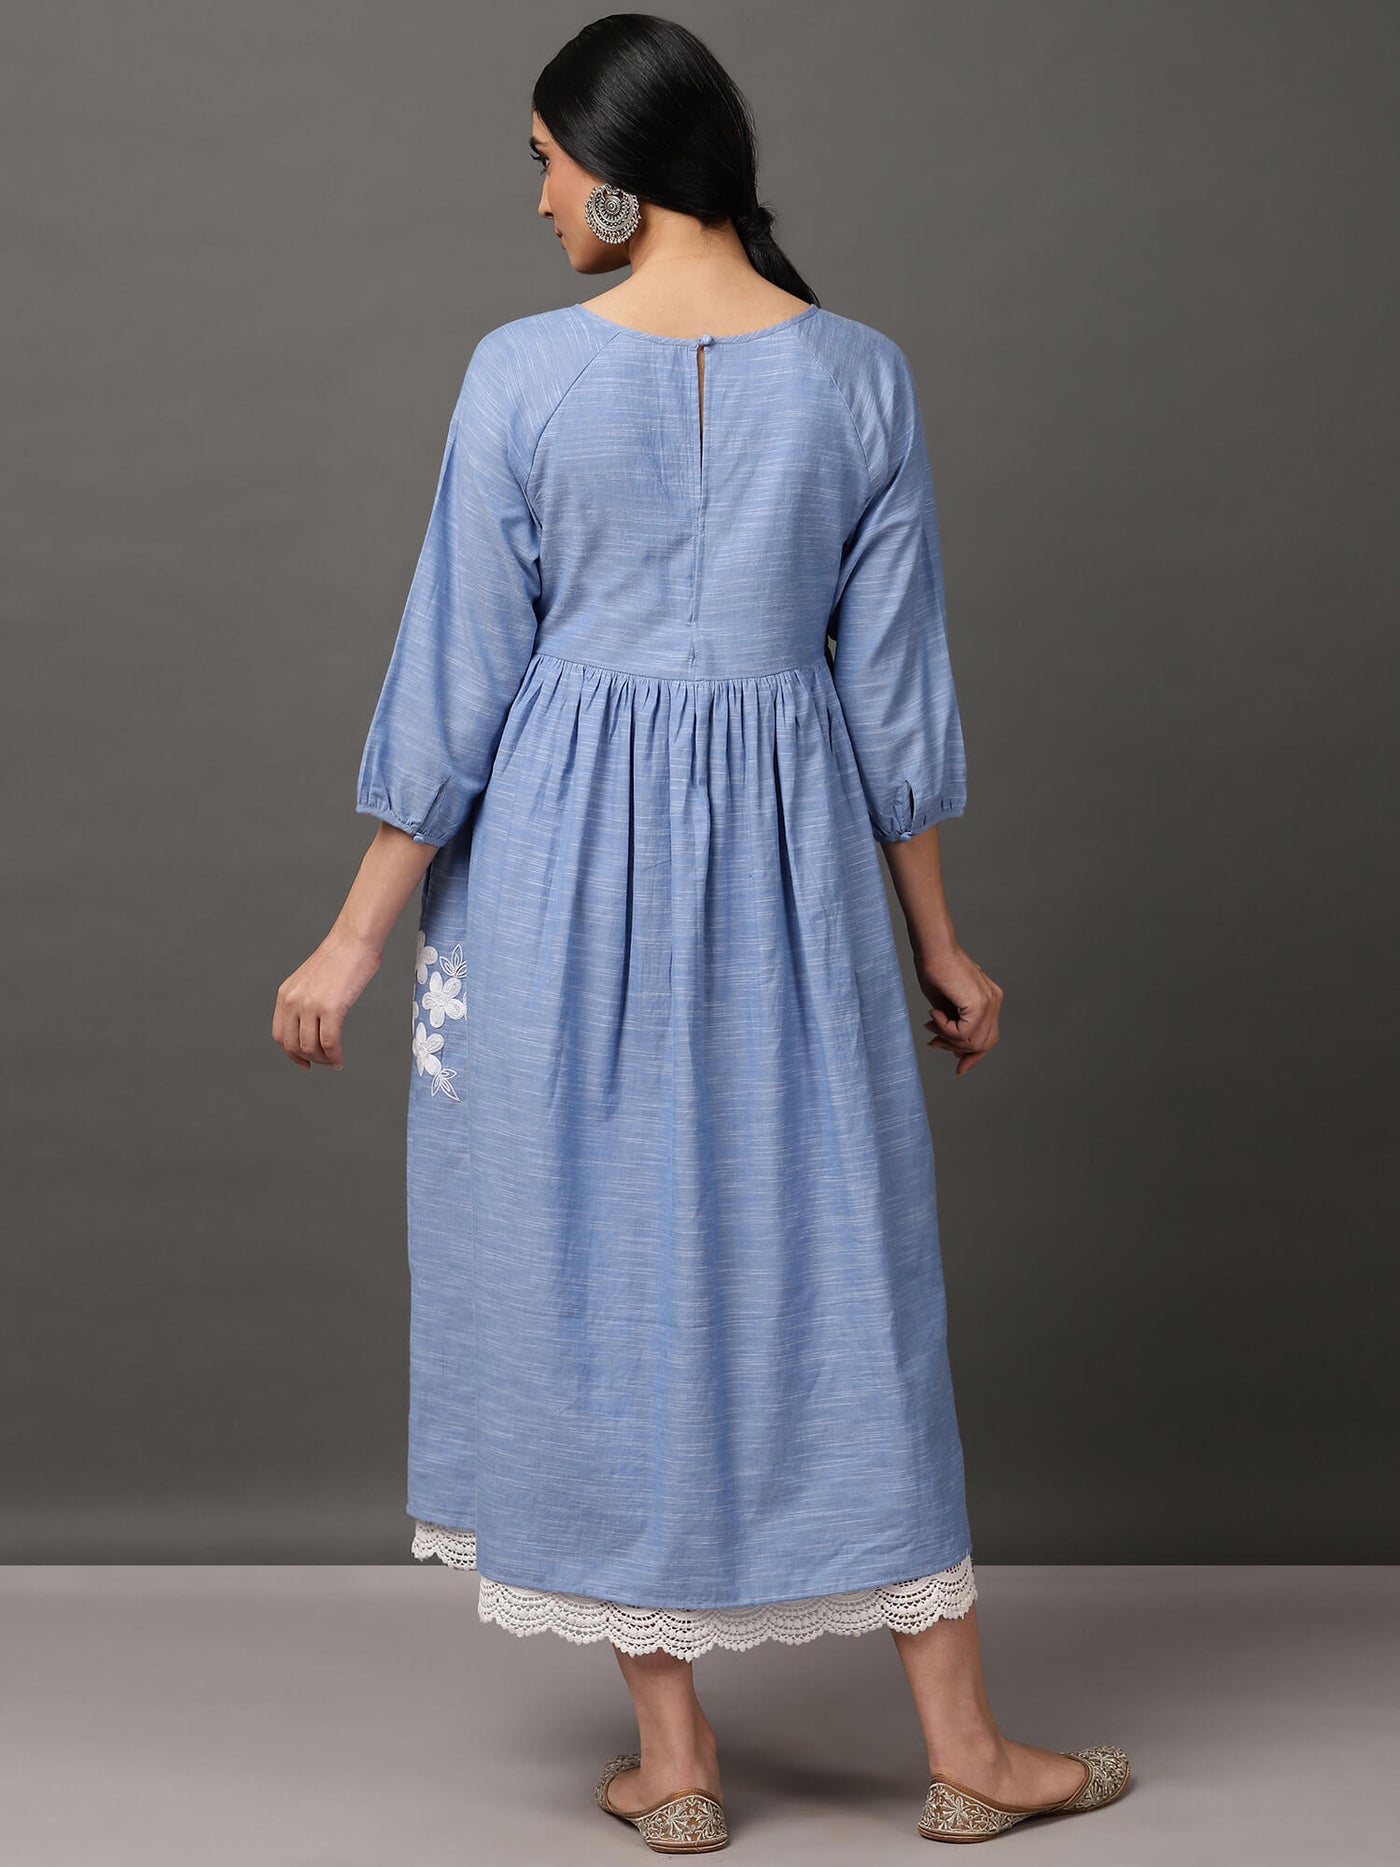 Blue Chambray cotton comfort dress with pockets and lace.